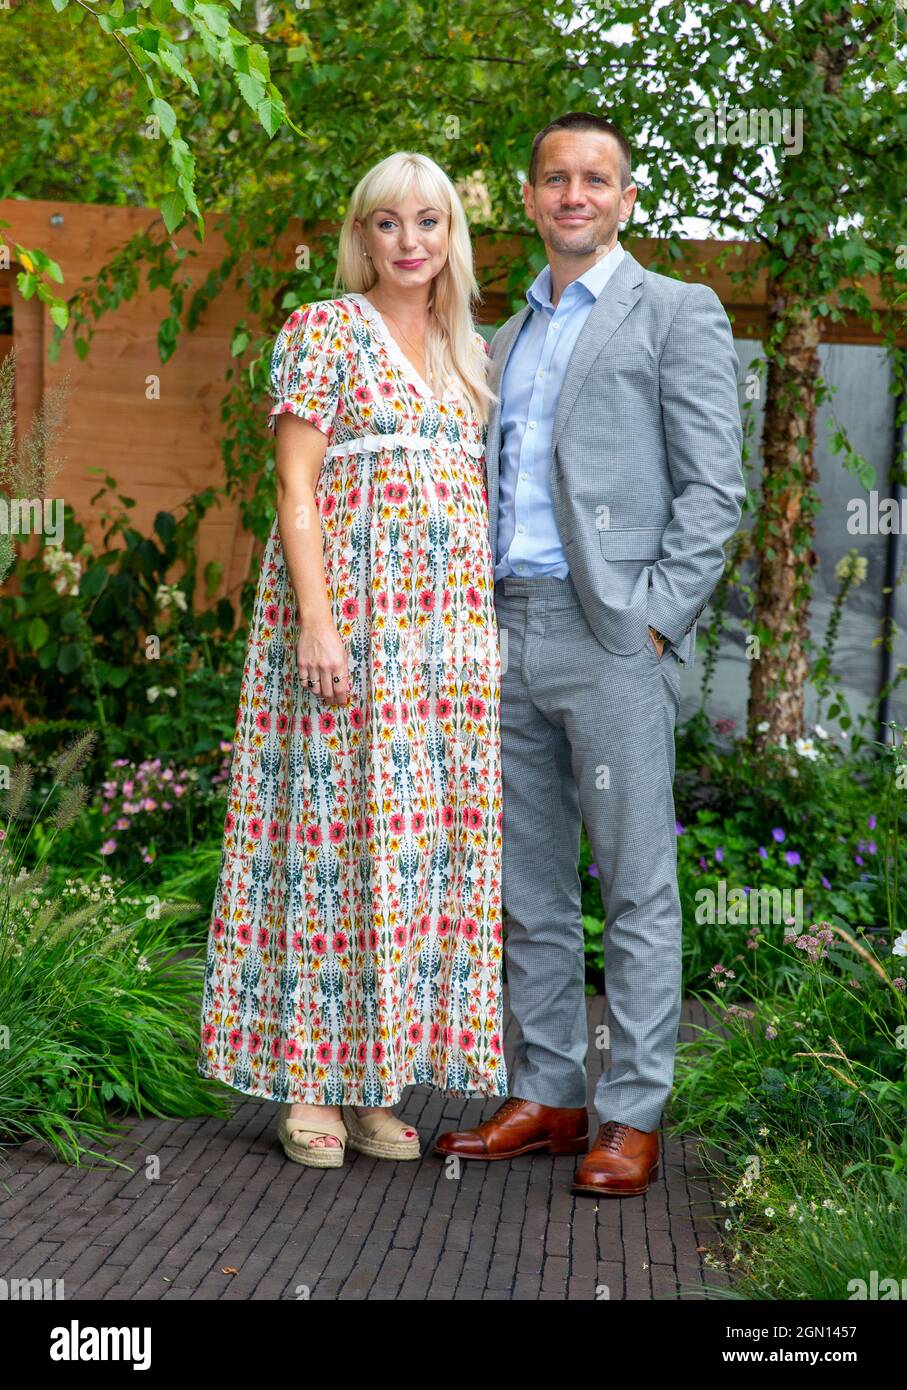 Helen George, star of 'Call the Midwife' with partner Jack Ashton at the RHS Chelsea Flower Show Stock Photo